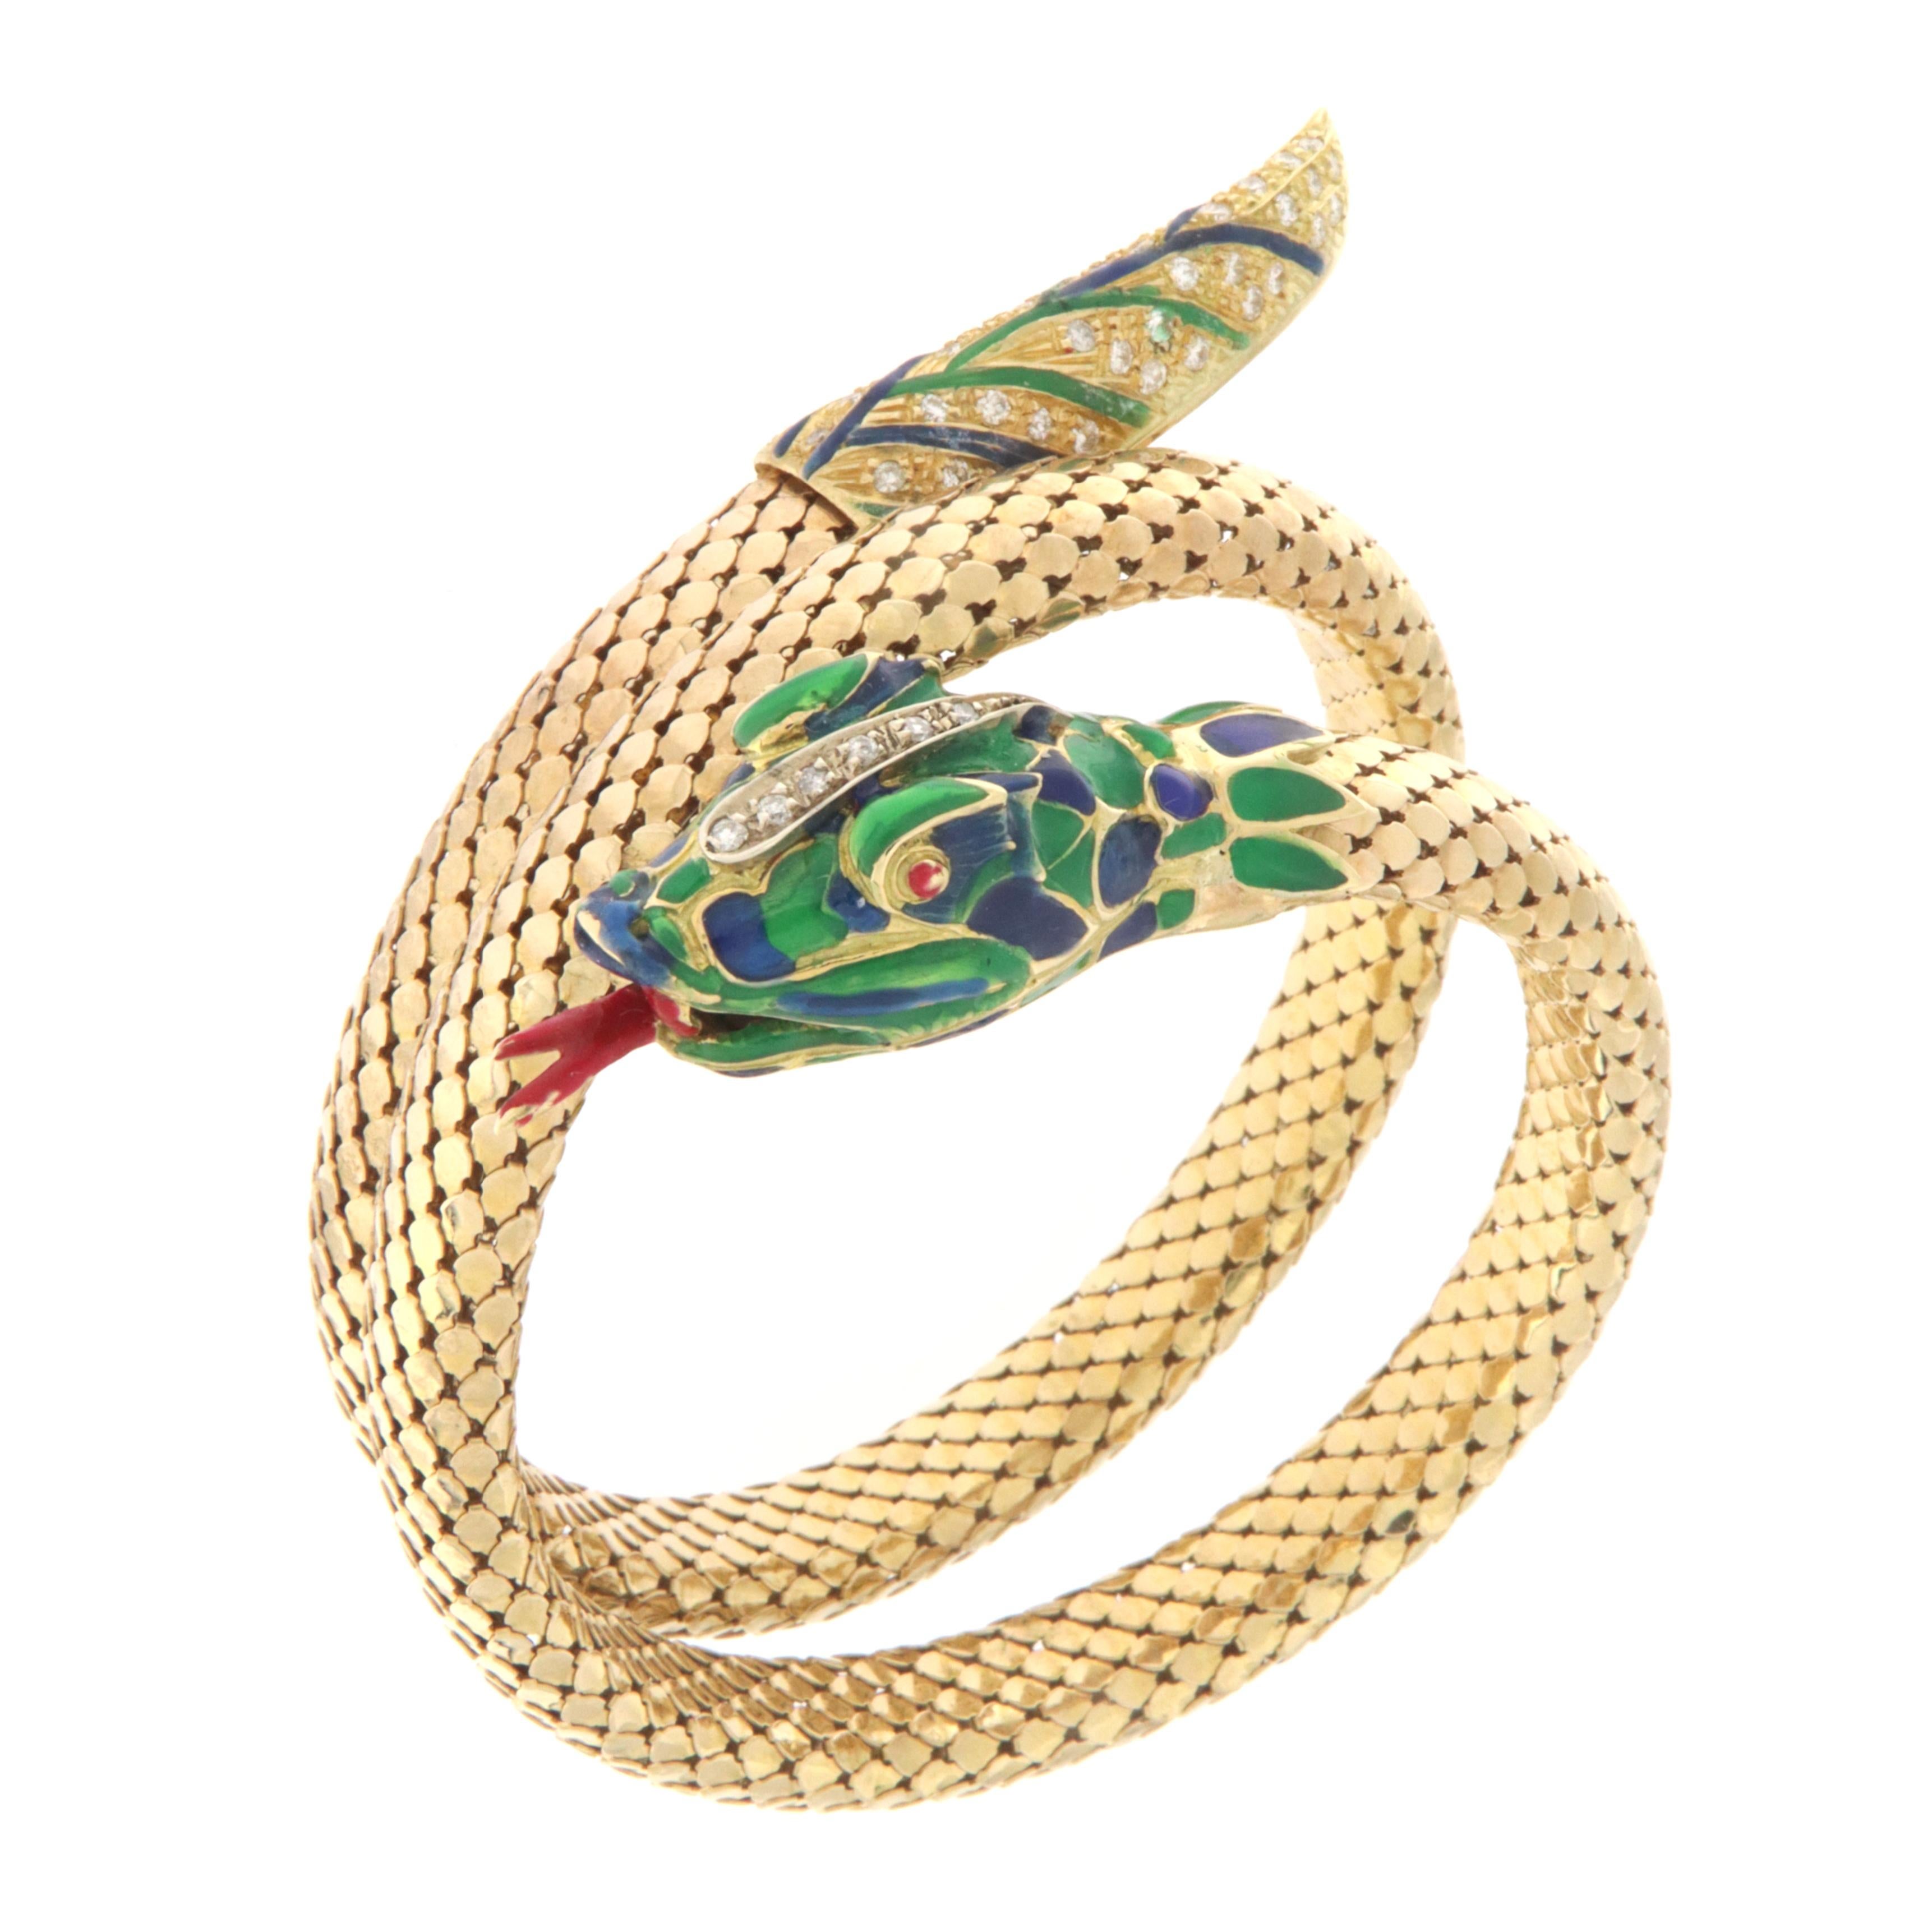 Beautiful 18 karat yellow gold snake bracelet mounted with natural diamonds and green,blue and red enamel, the bracelet can be adapted to any wrist size as shown in the video.
Snake-shaped jewels always have a particular charm and denote grace,